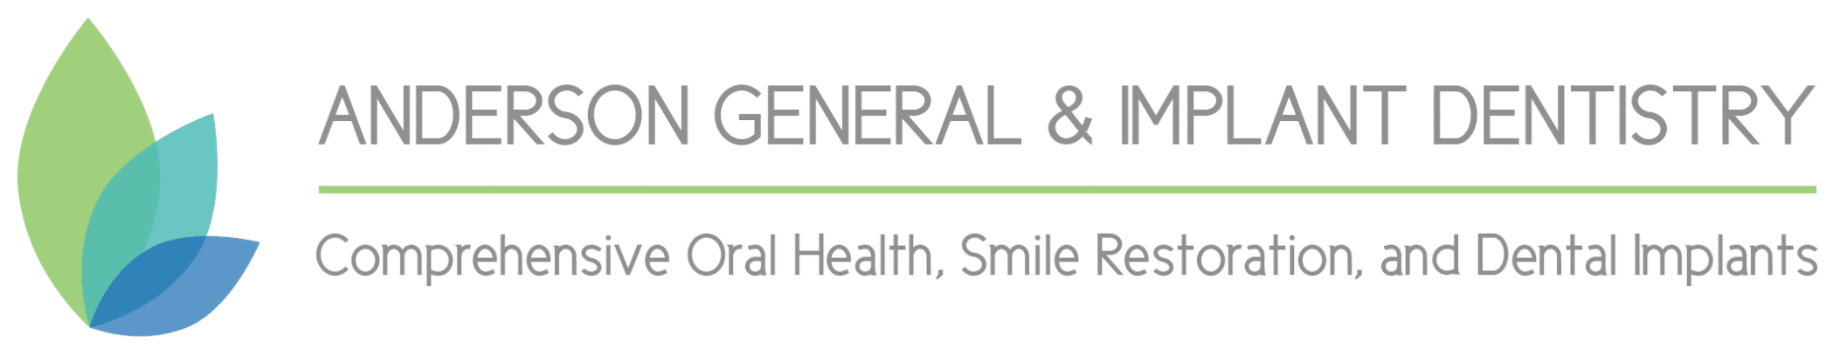 Anderson General & Implant Dentistry